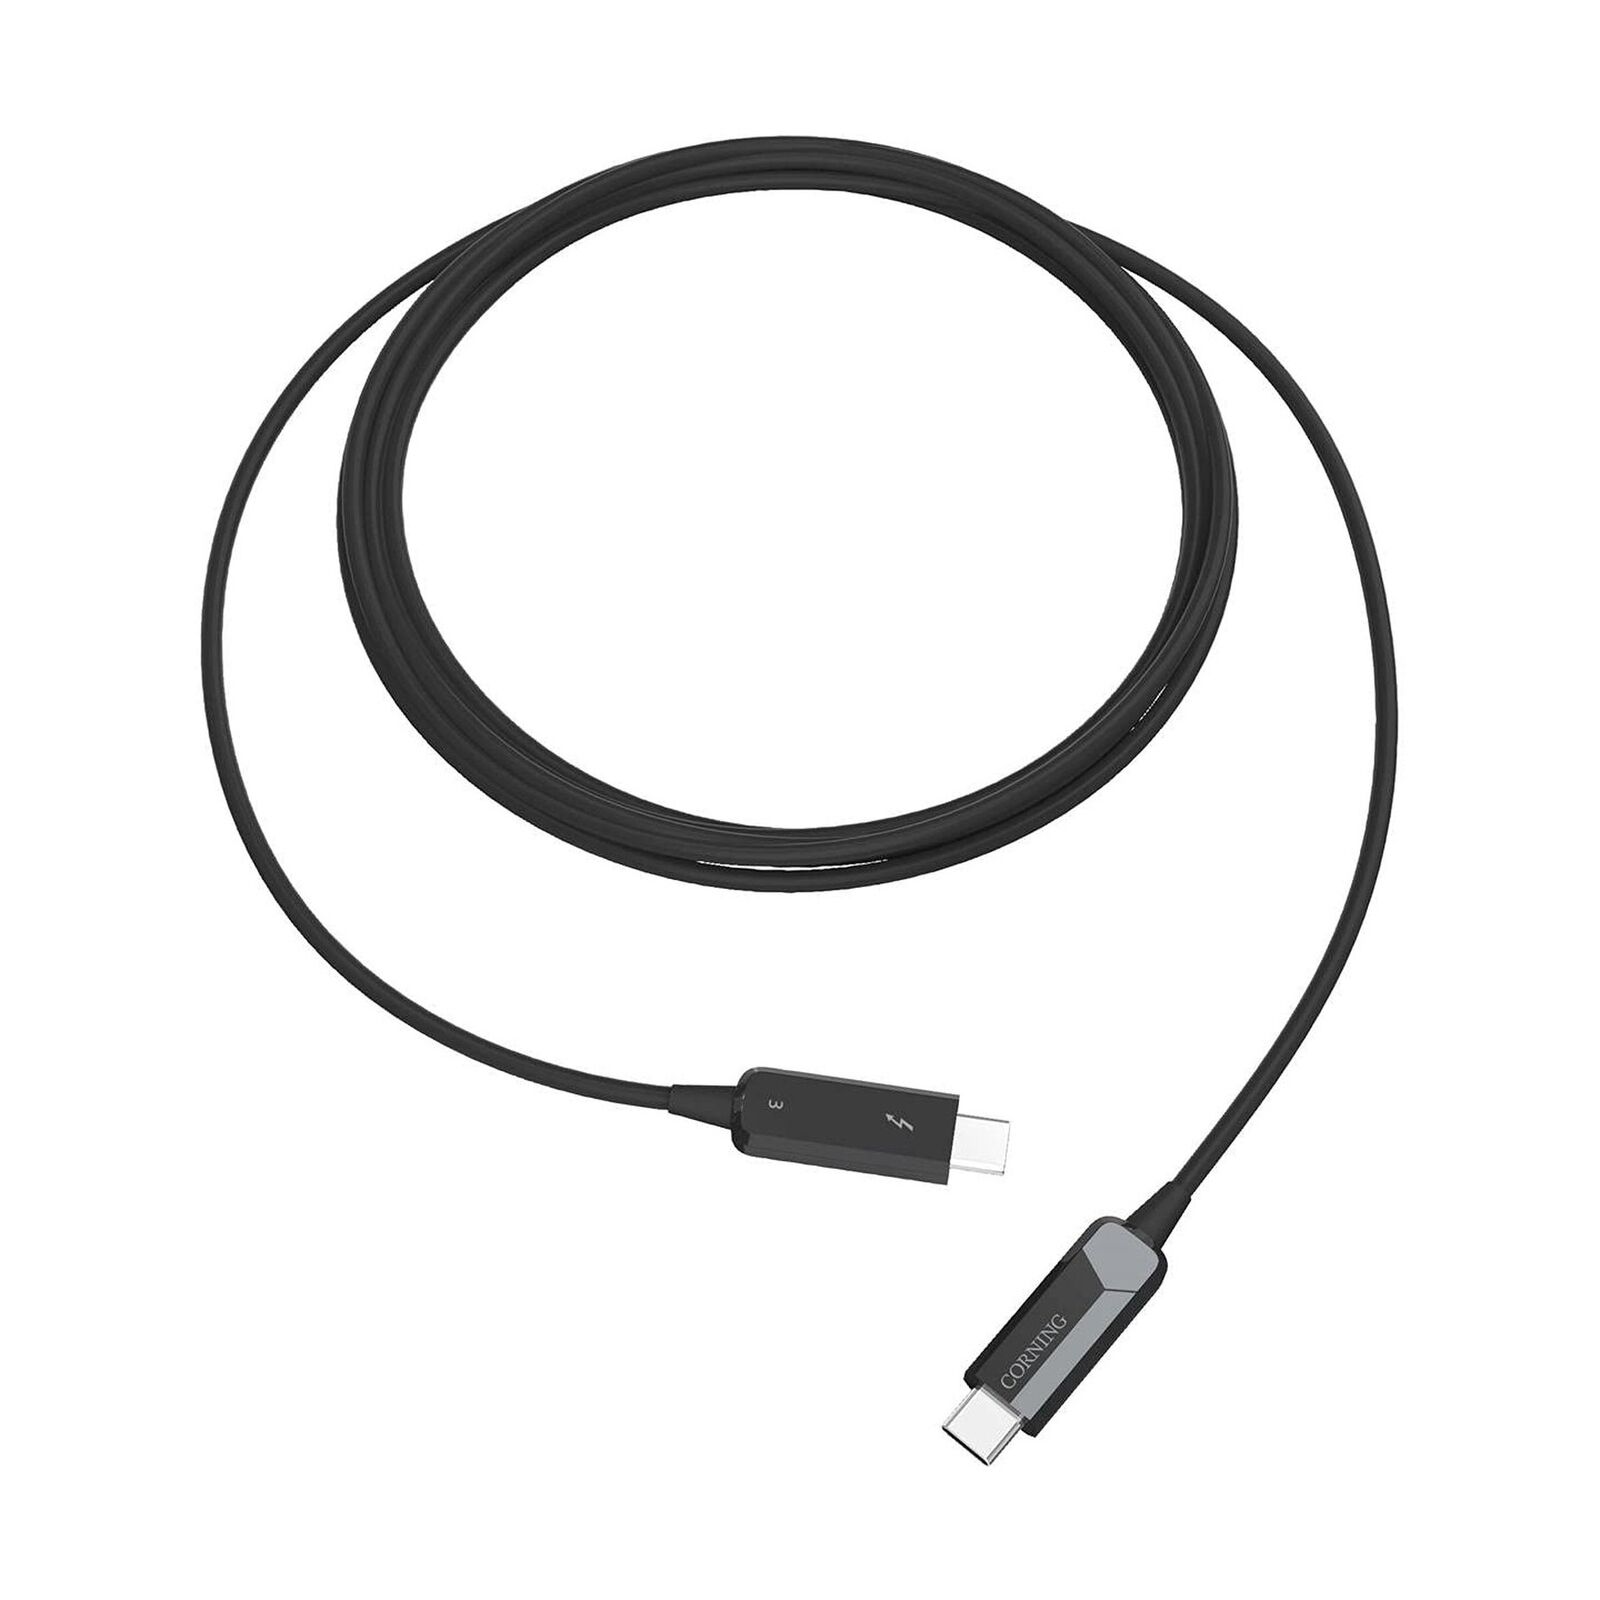 Optical Cables by Corning Thunderbolt 3 USB Type-C Male Optical Cable, 50m